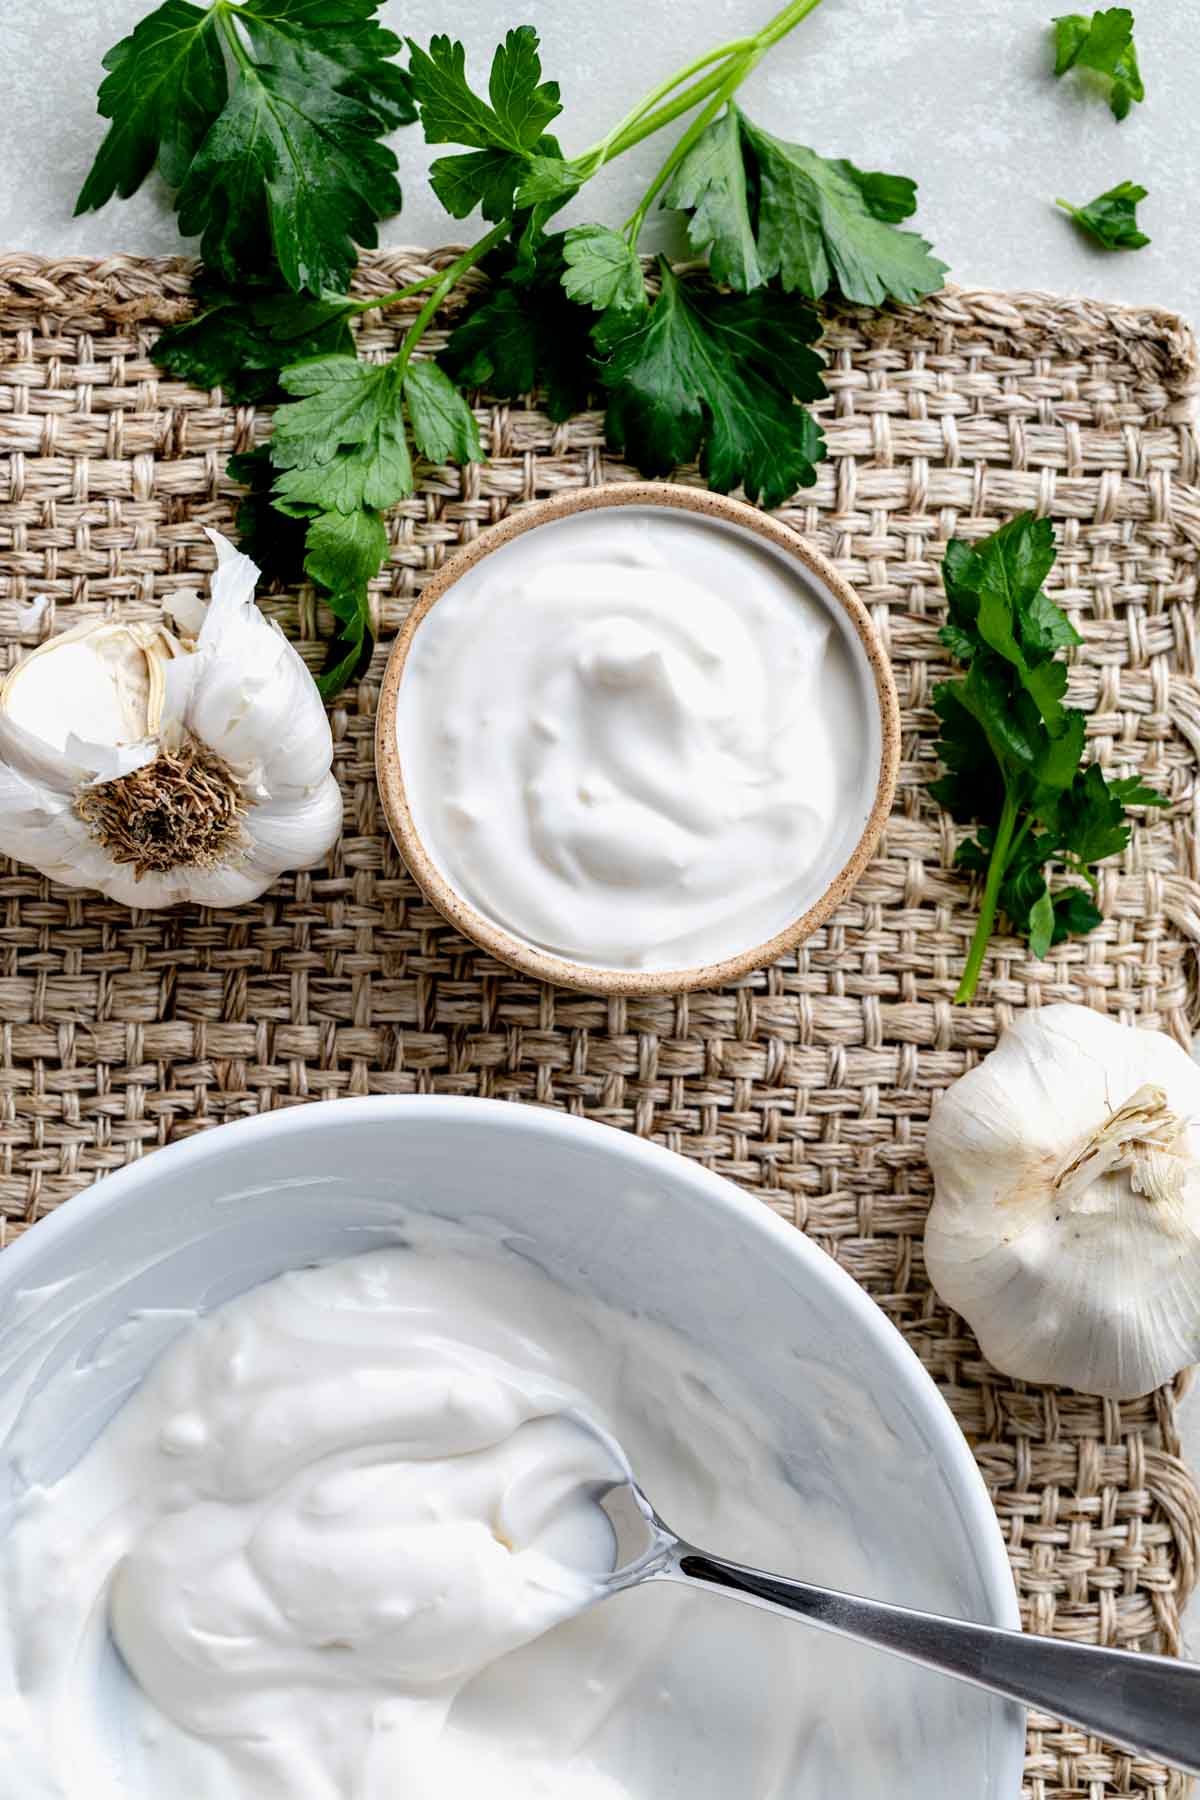 Greek Yogurt aioli in a small serving dish and the white mixing bowl